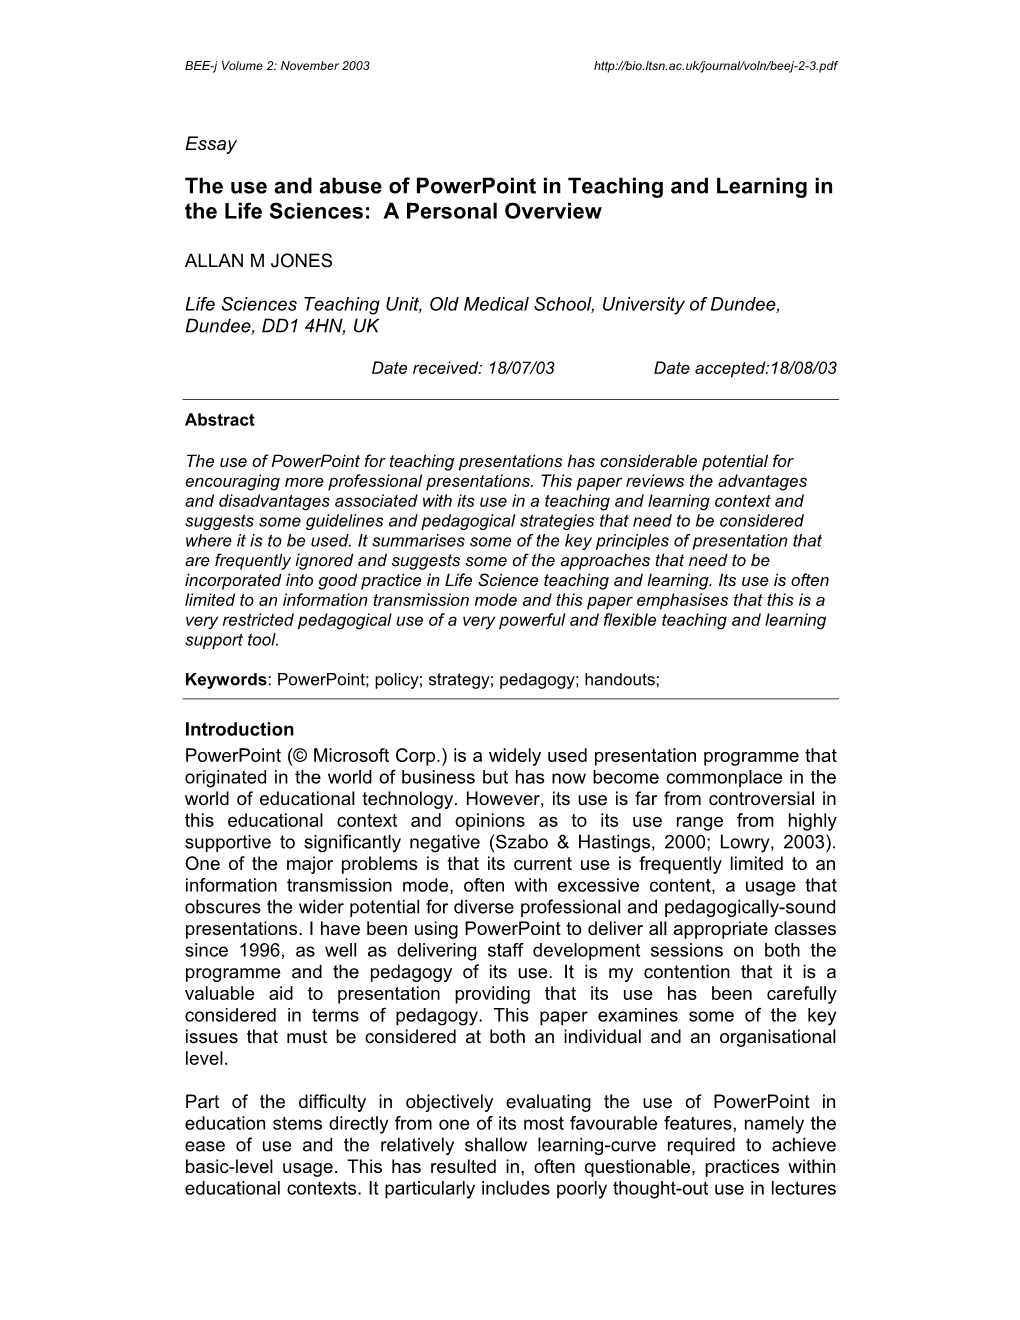 The Use and Abuse of Powerpoint in Teaching and Learning in the Life Sciences: a Personal Overview